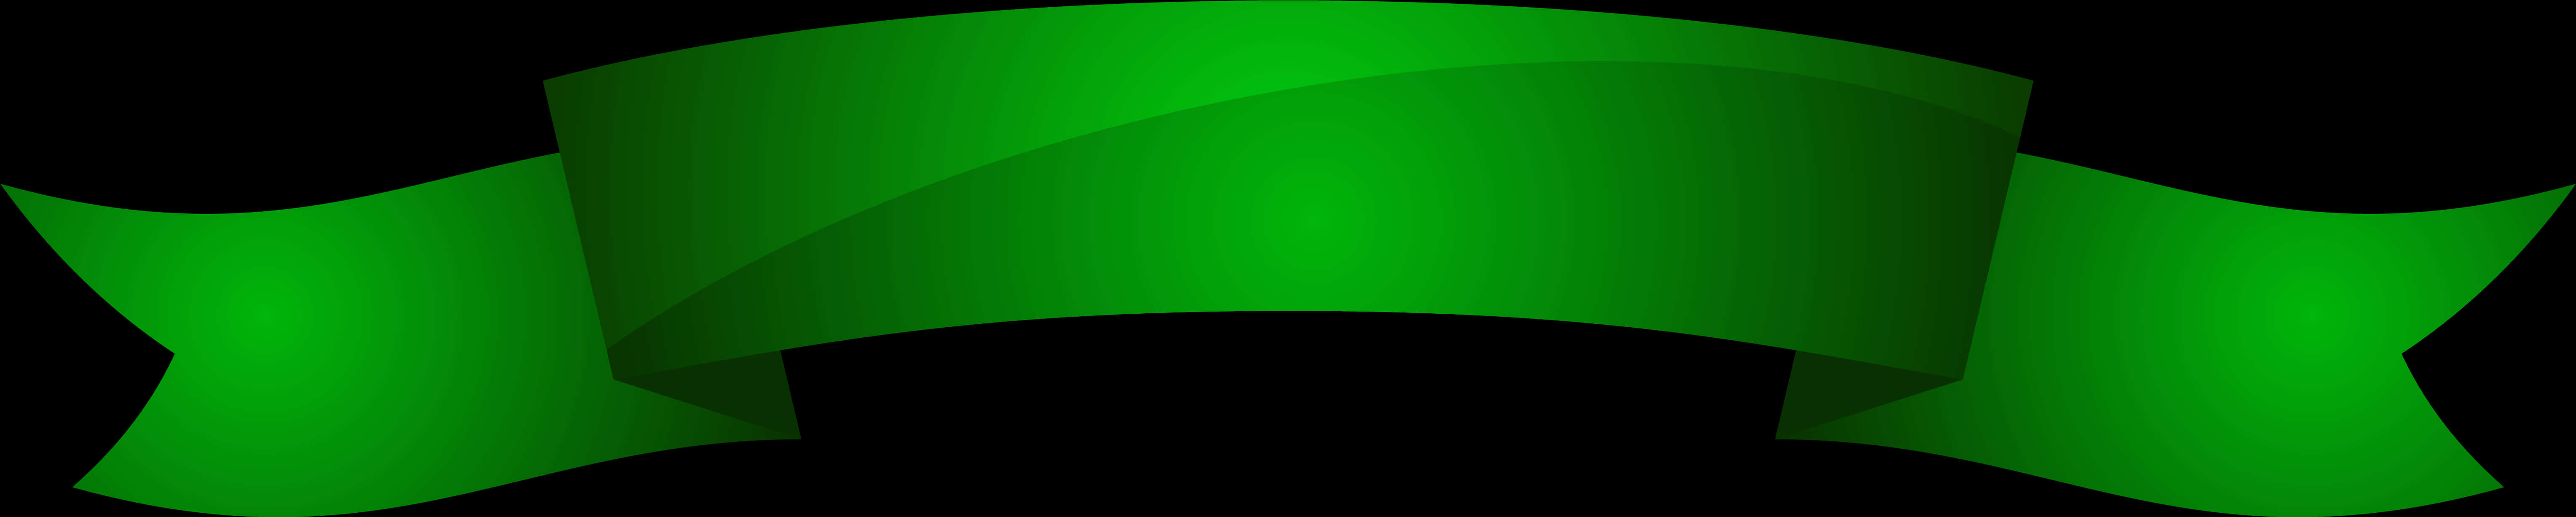 Green Banner Ribbon Graphic PNG image